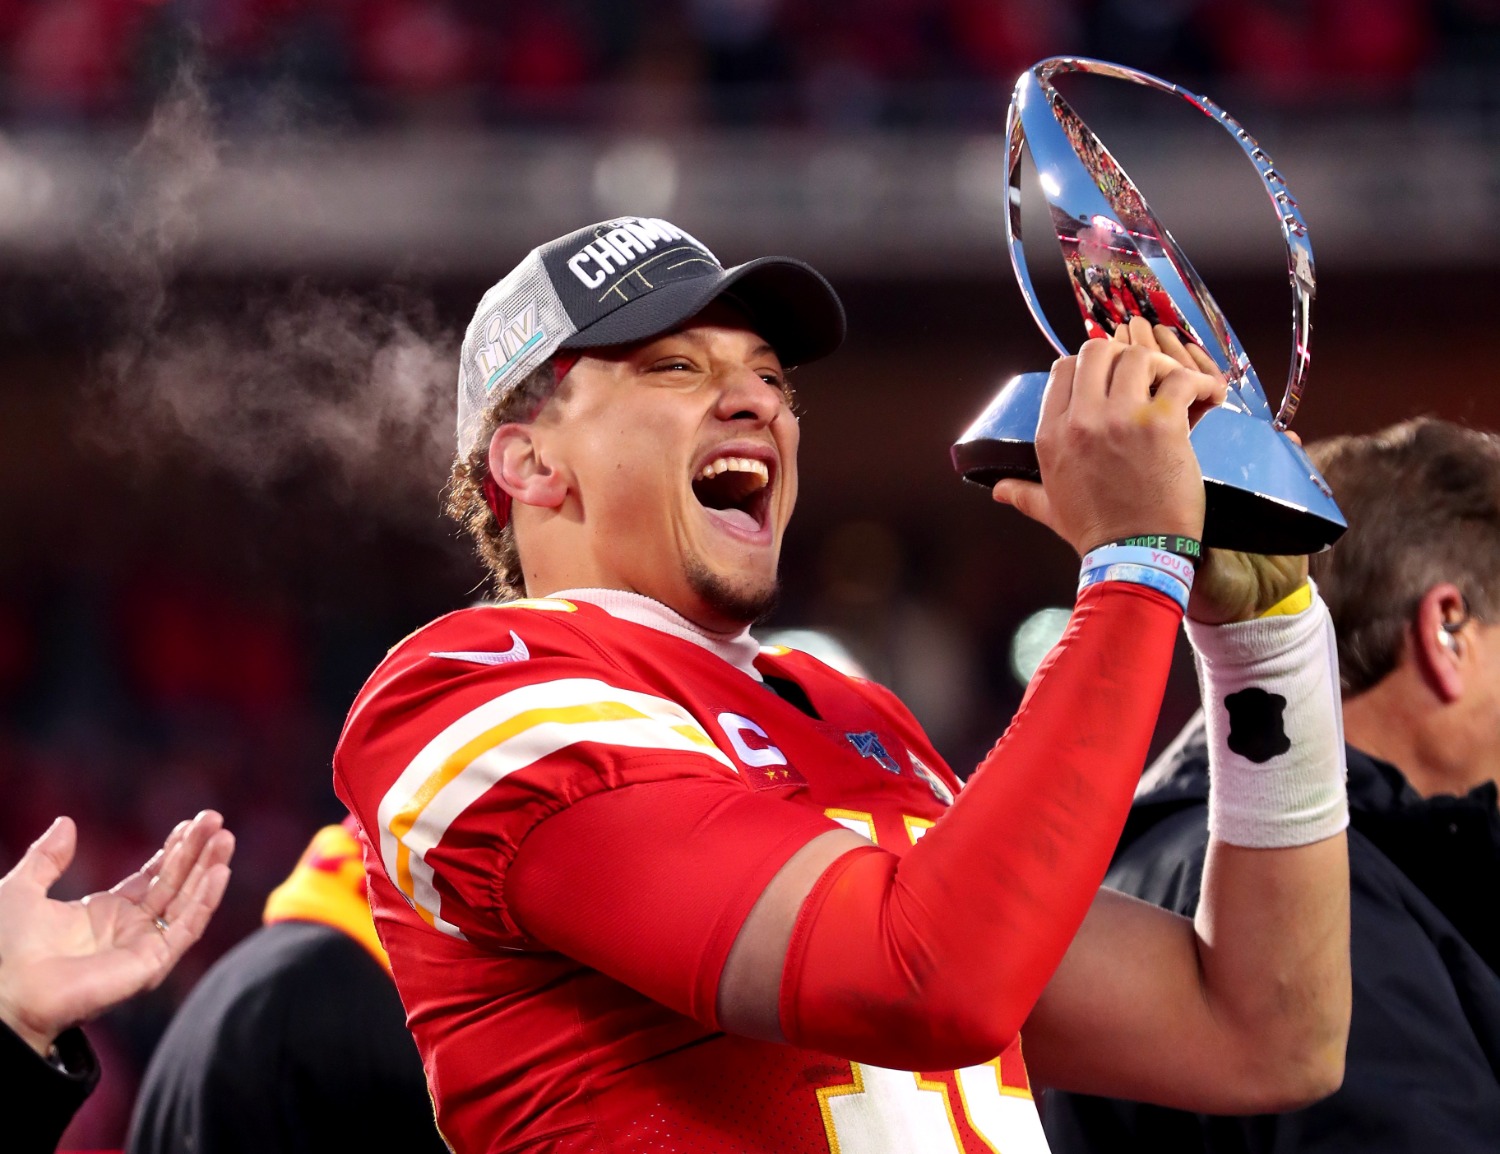 Patrick Mahomes just added another job title to his impressive Chiefs resume.